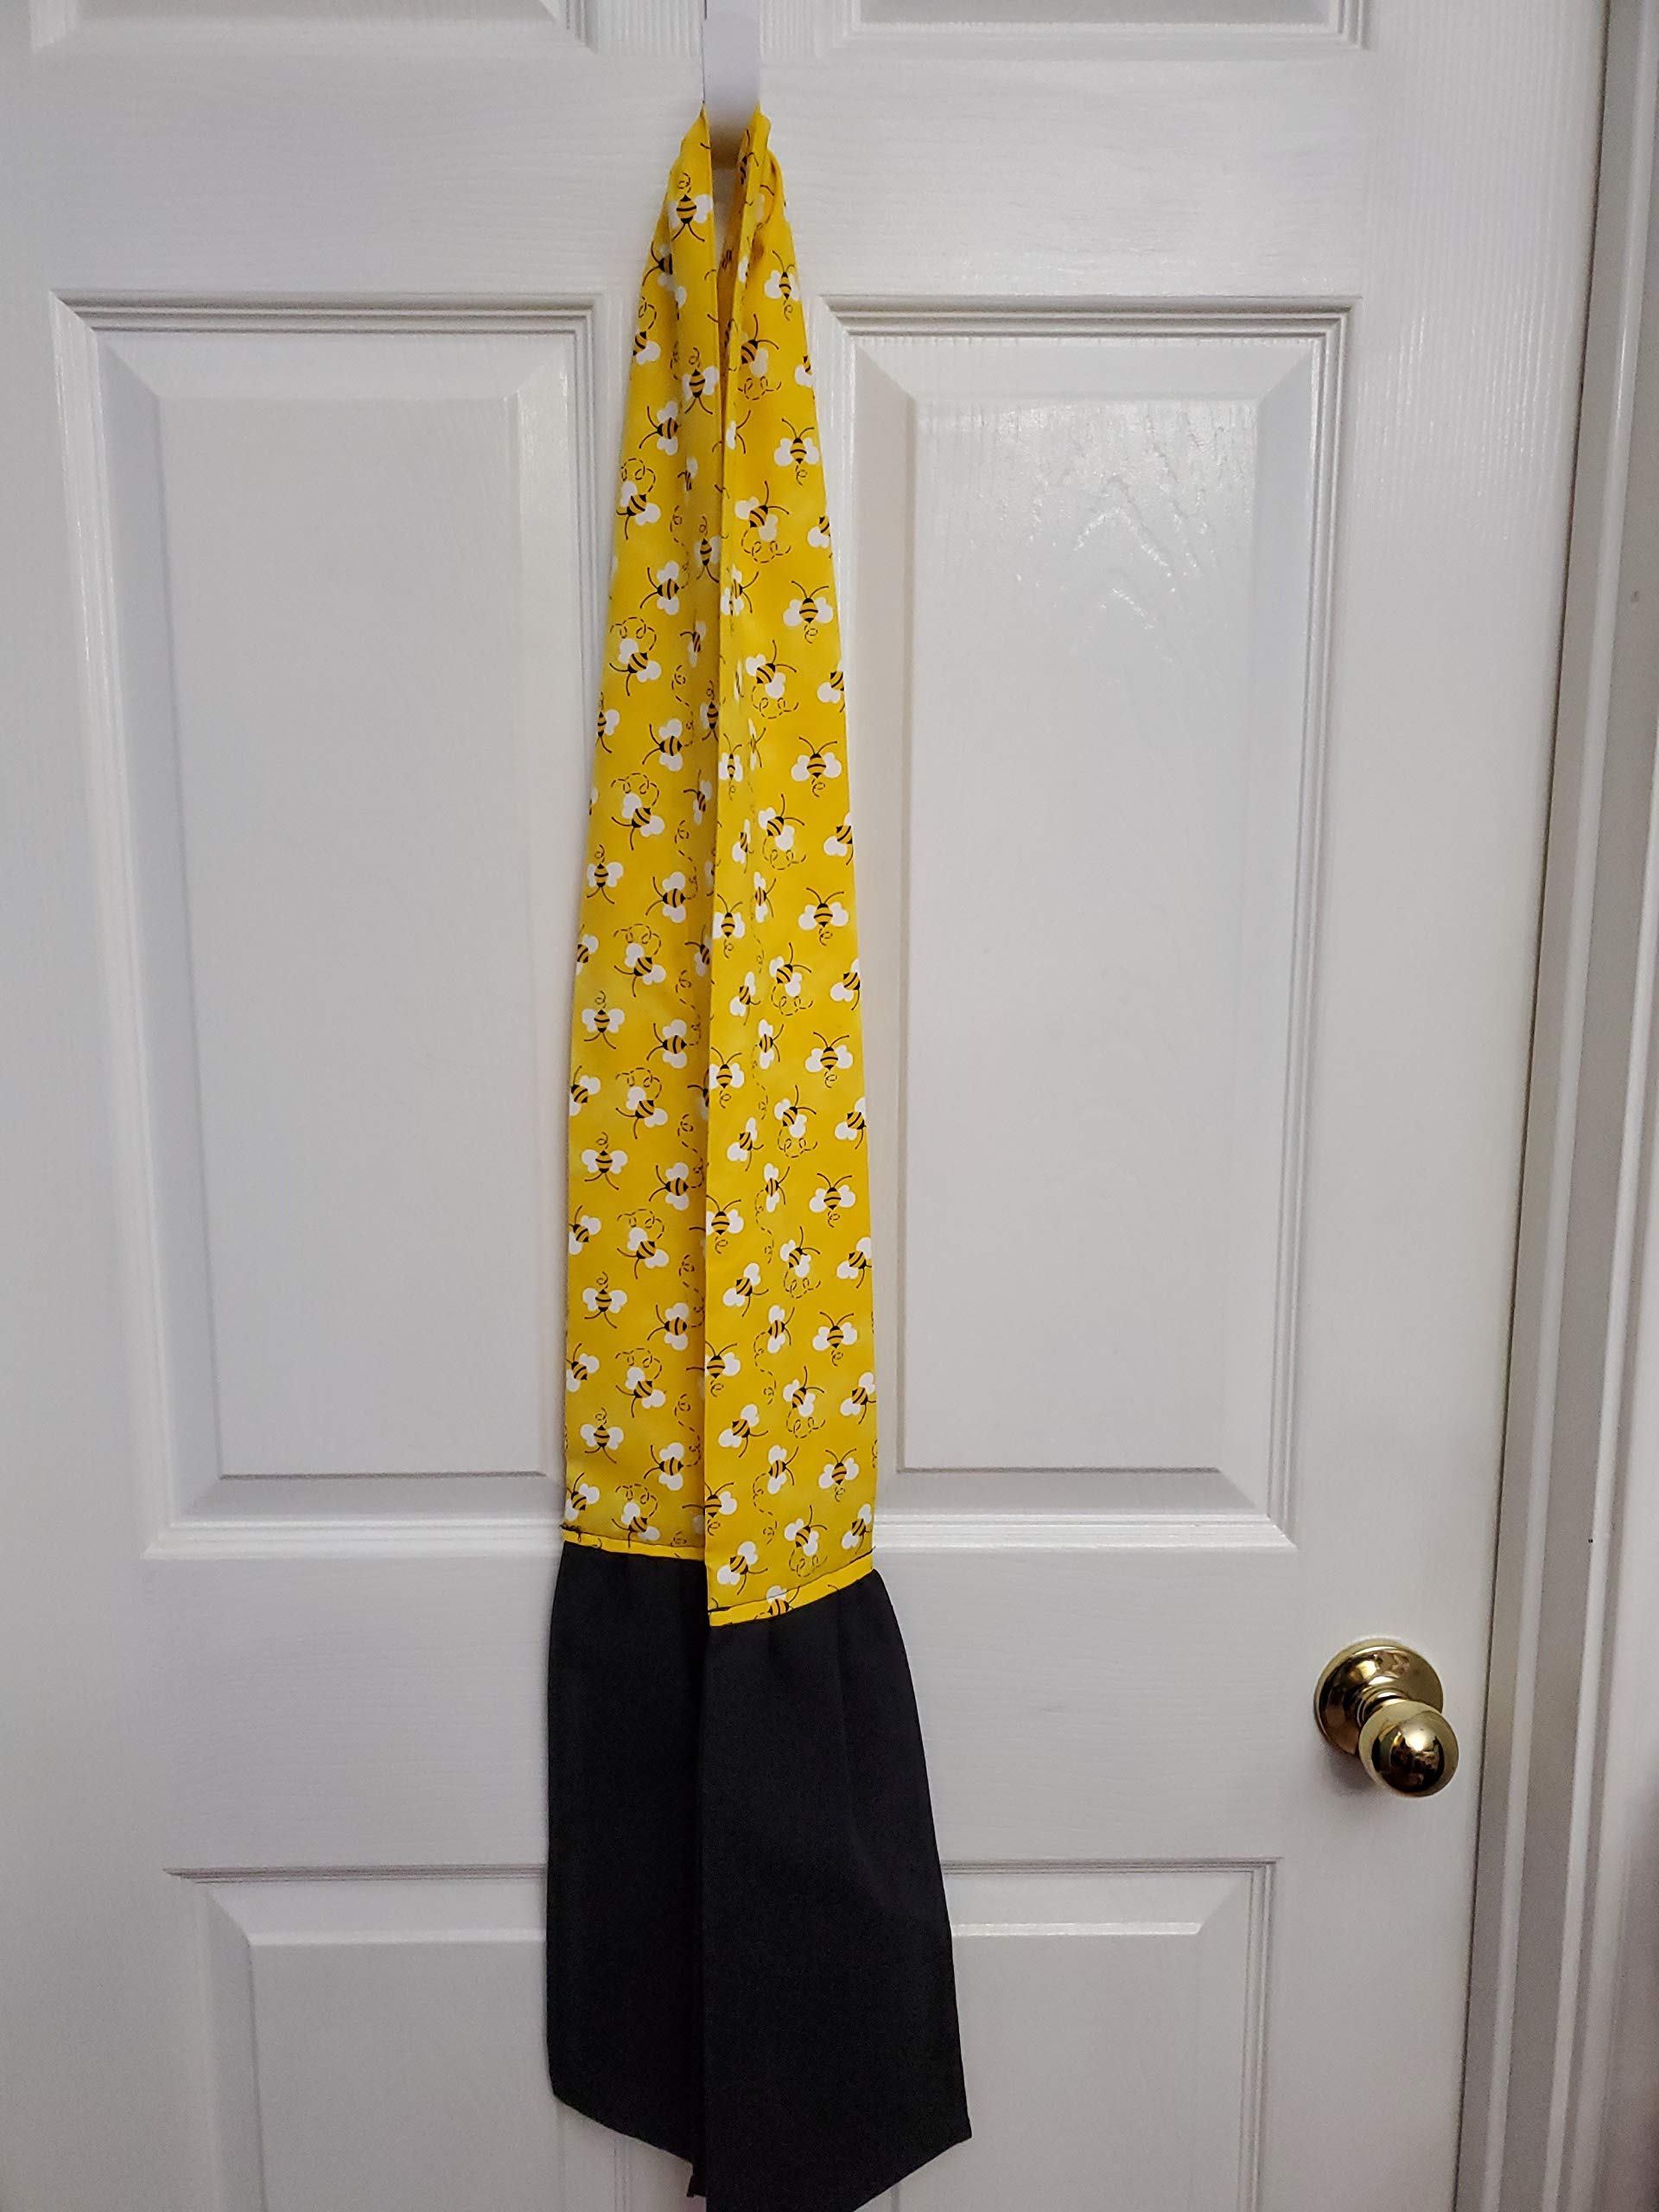 Bumble Bee Neck Towel, Yellow & Black Kitchen Boa, Neck Apron, Kitchen Neck Scarf, Kitchen Scarf, Baker’s Boa, Chef’s Towel, Cooking Towel, Grilling Towel, Gifts under $25